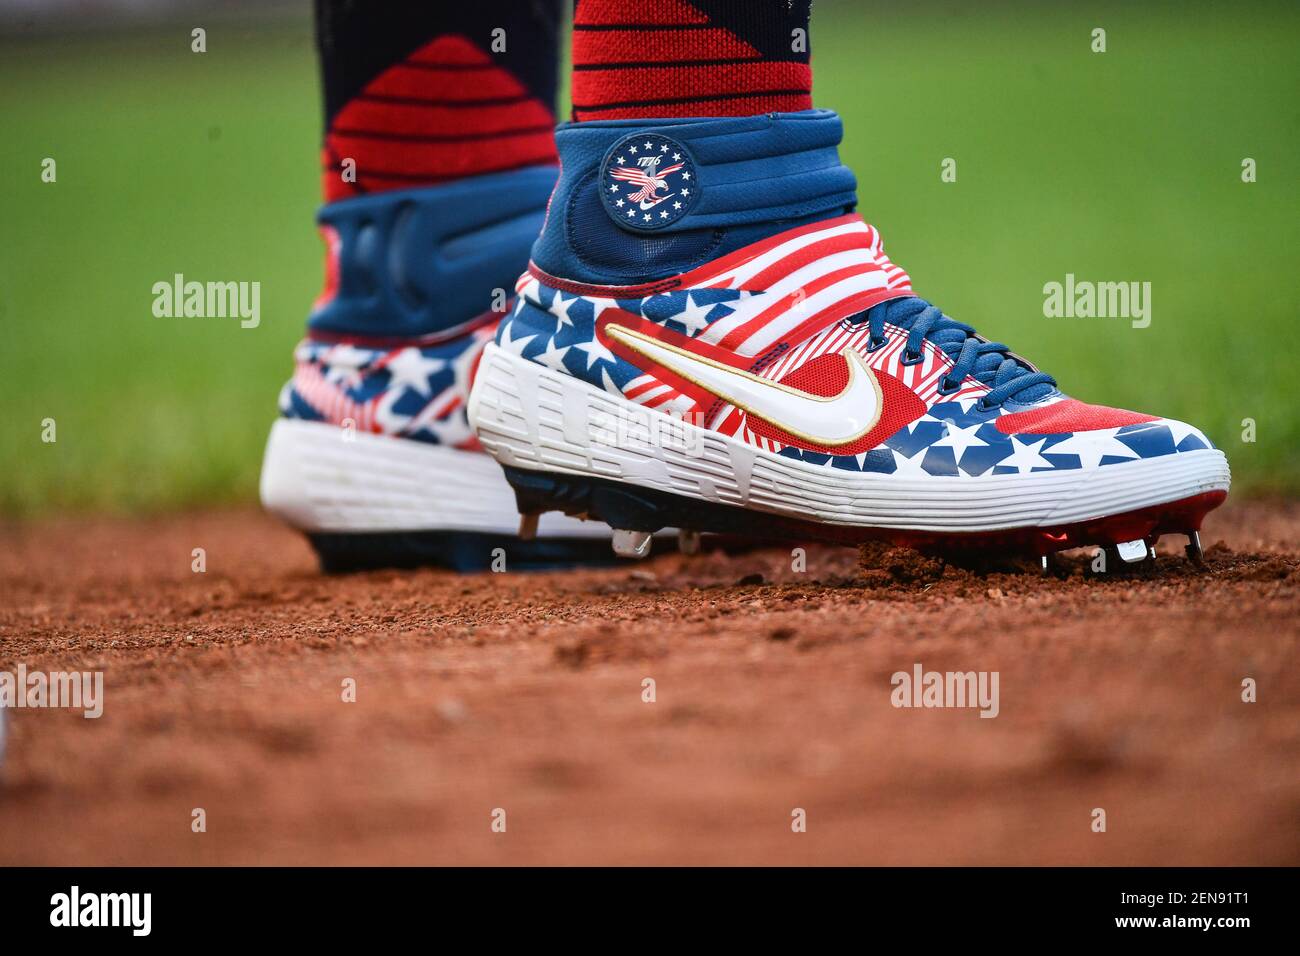 July 5, 2019: Nike 1776 celebration shoes being worn during the MLB game  between the St. Louis Cardinals and the San Francisco Giants at Oracle Park  in San Francisco, California. Chris Brown/(Photo